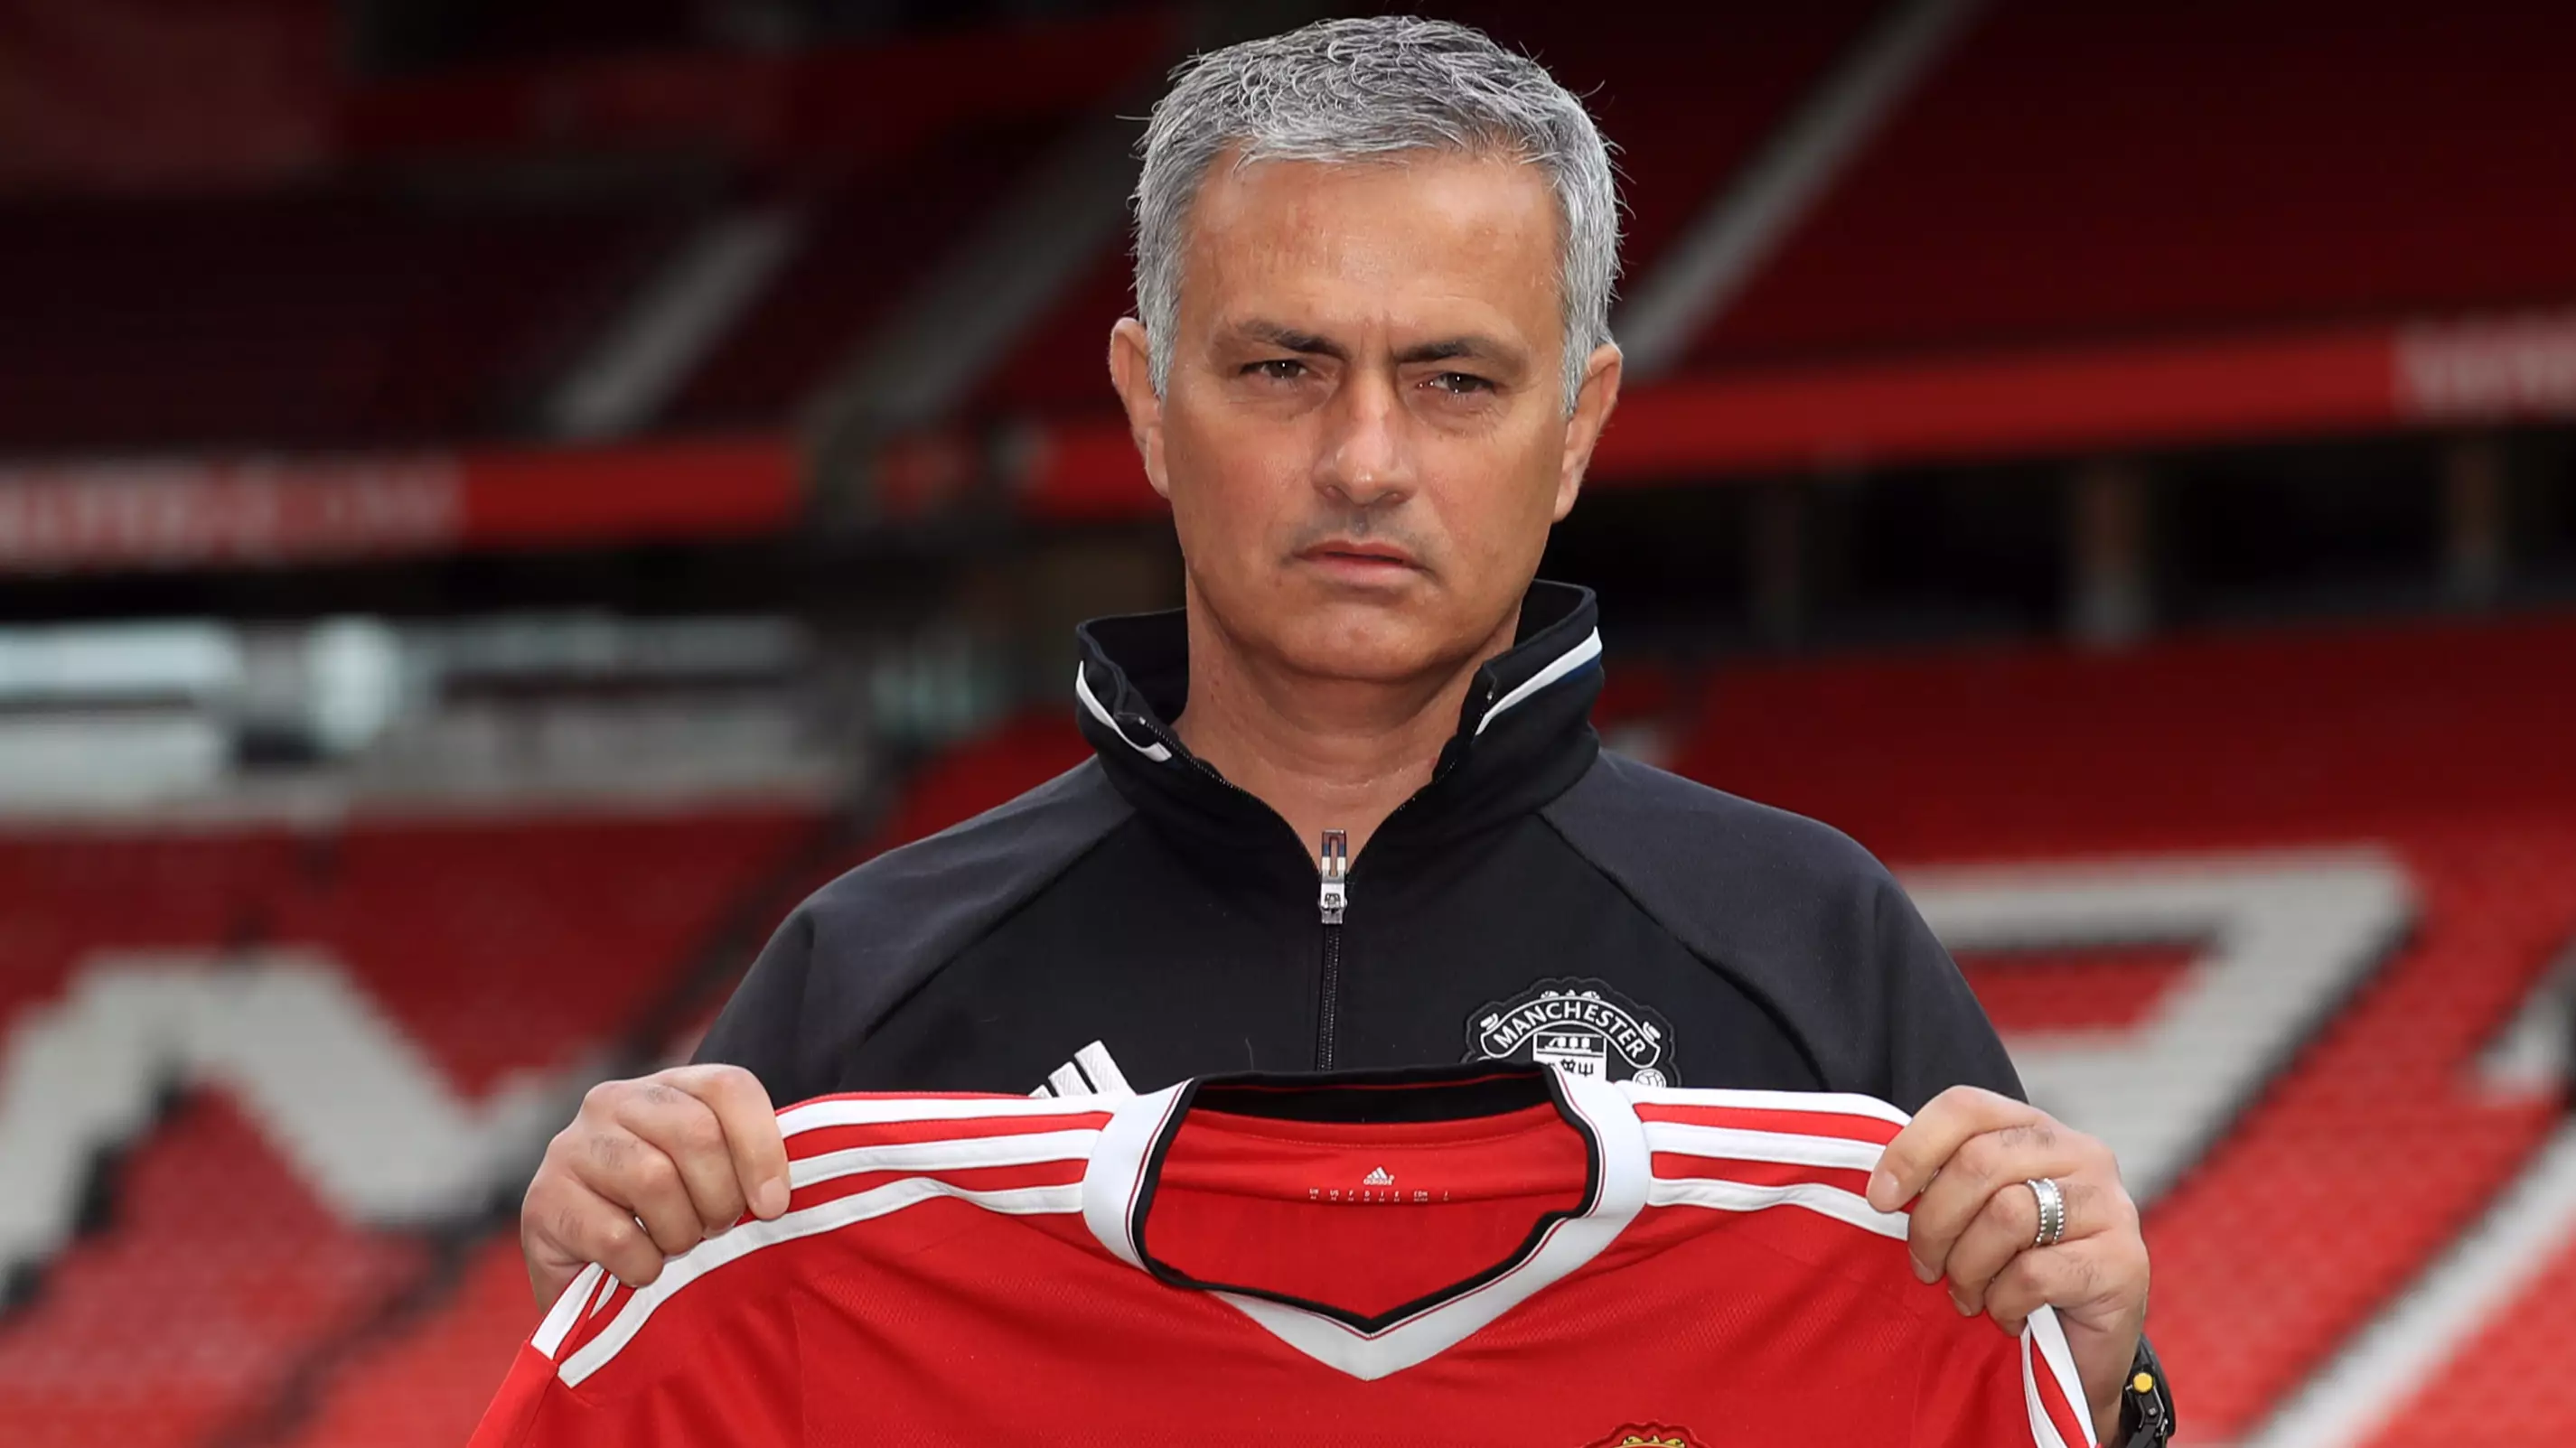 Man United Players Expect Jose Mourinho To Depart The Club Soon